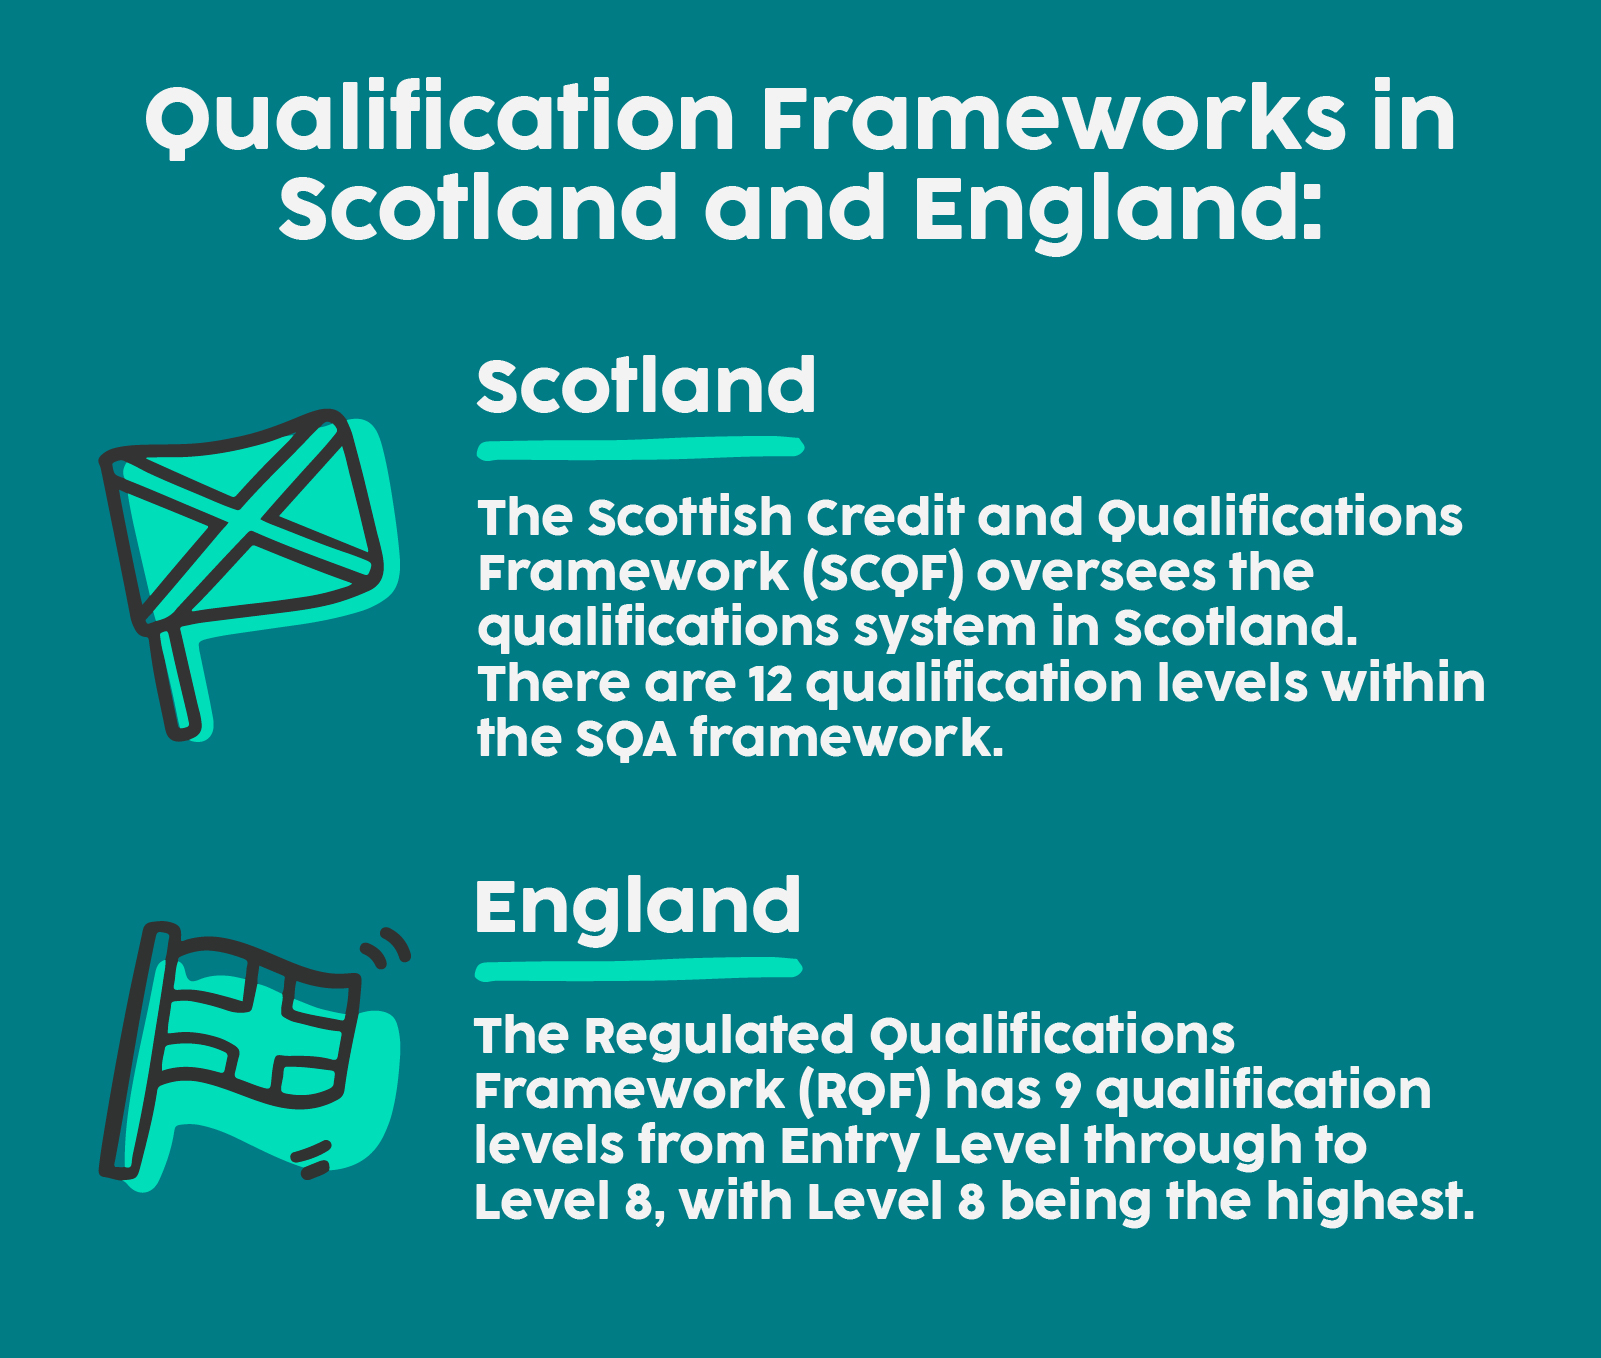 Education qualification frameworks in England and Scotland